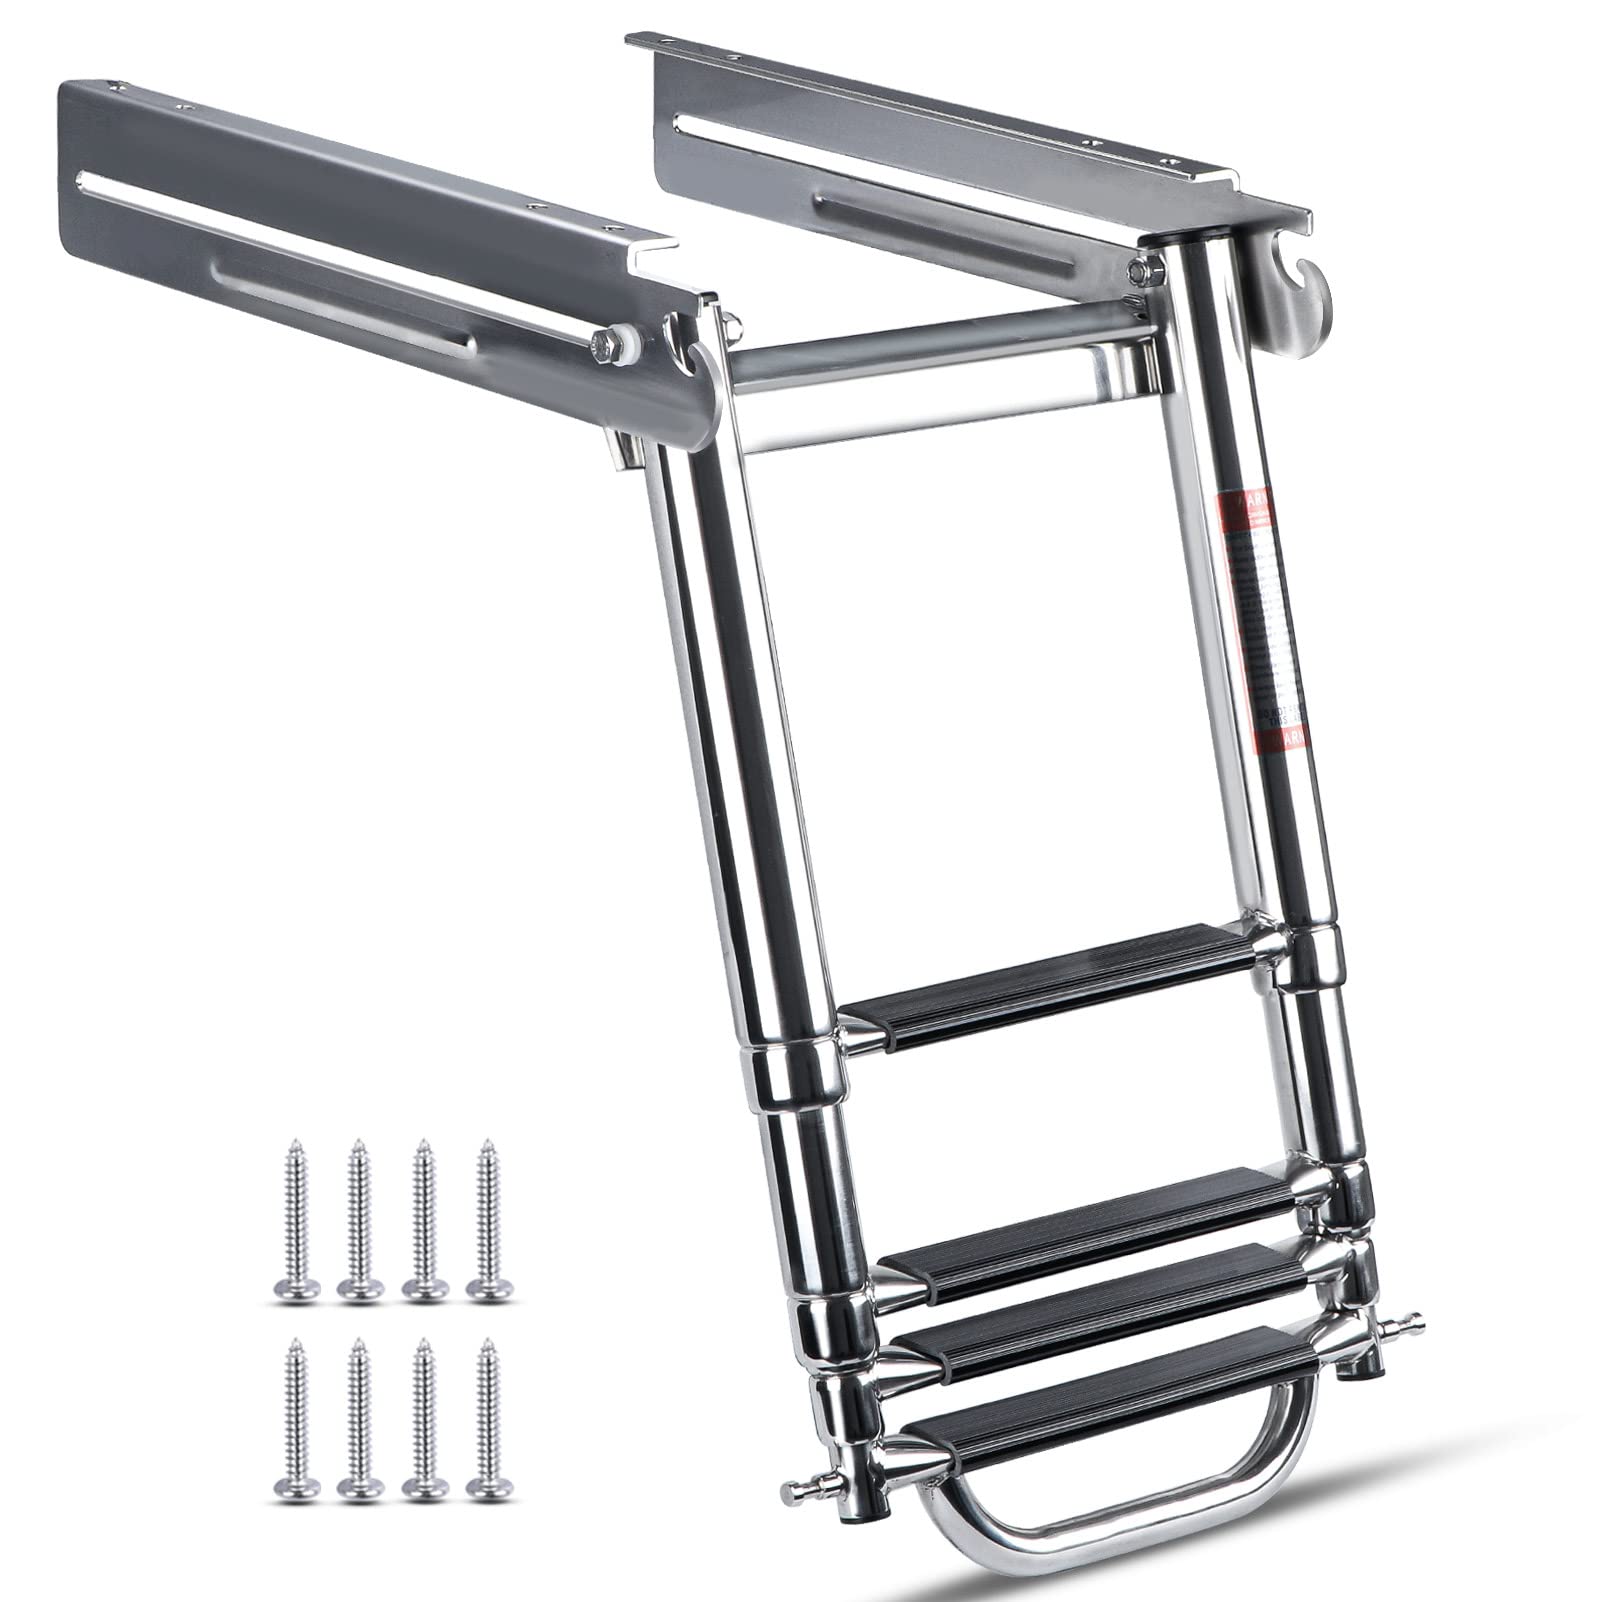 4 Step Foldable Boat Ladder, Stainless Steel Marine Foldable Pontoon Boat  Ladder with Rubber Grips Folding Boarding Ladder for Fishing Boat Swimming